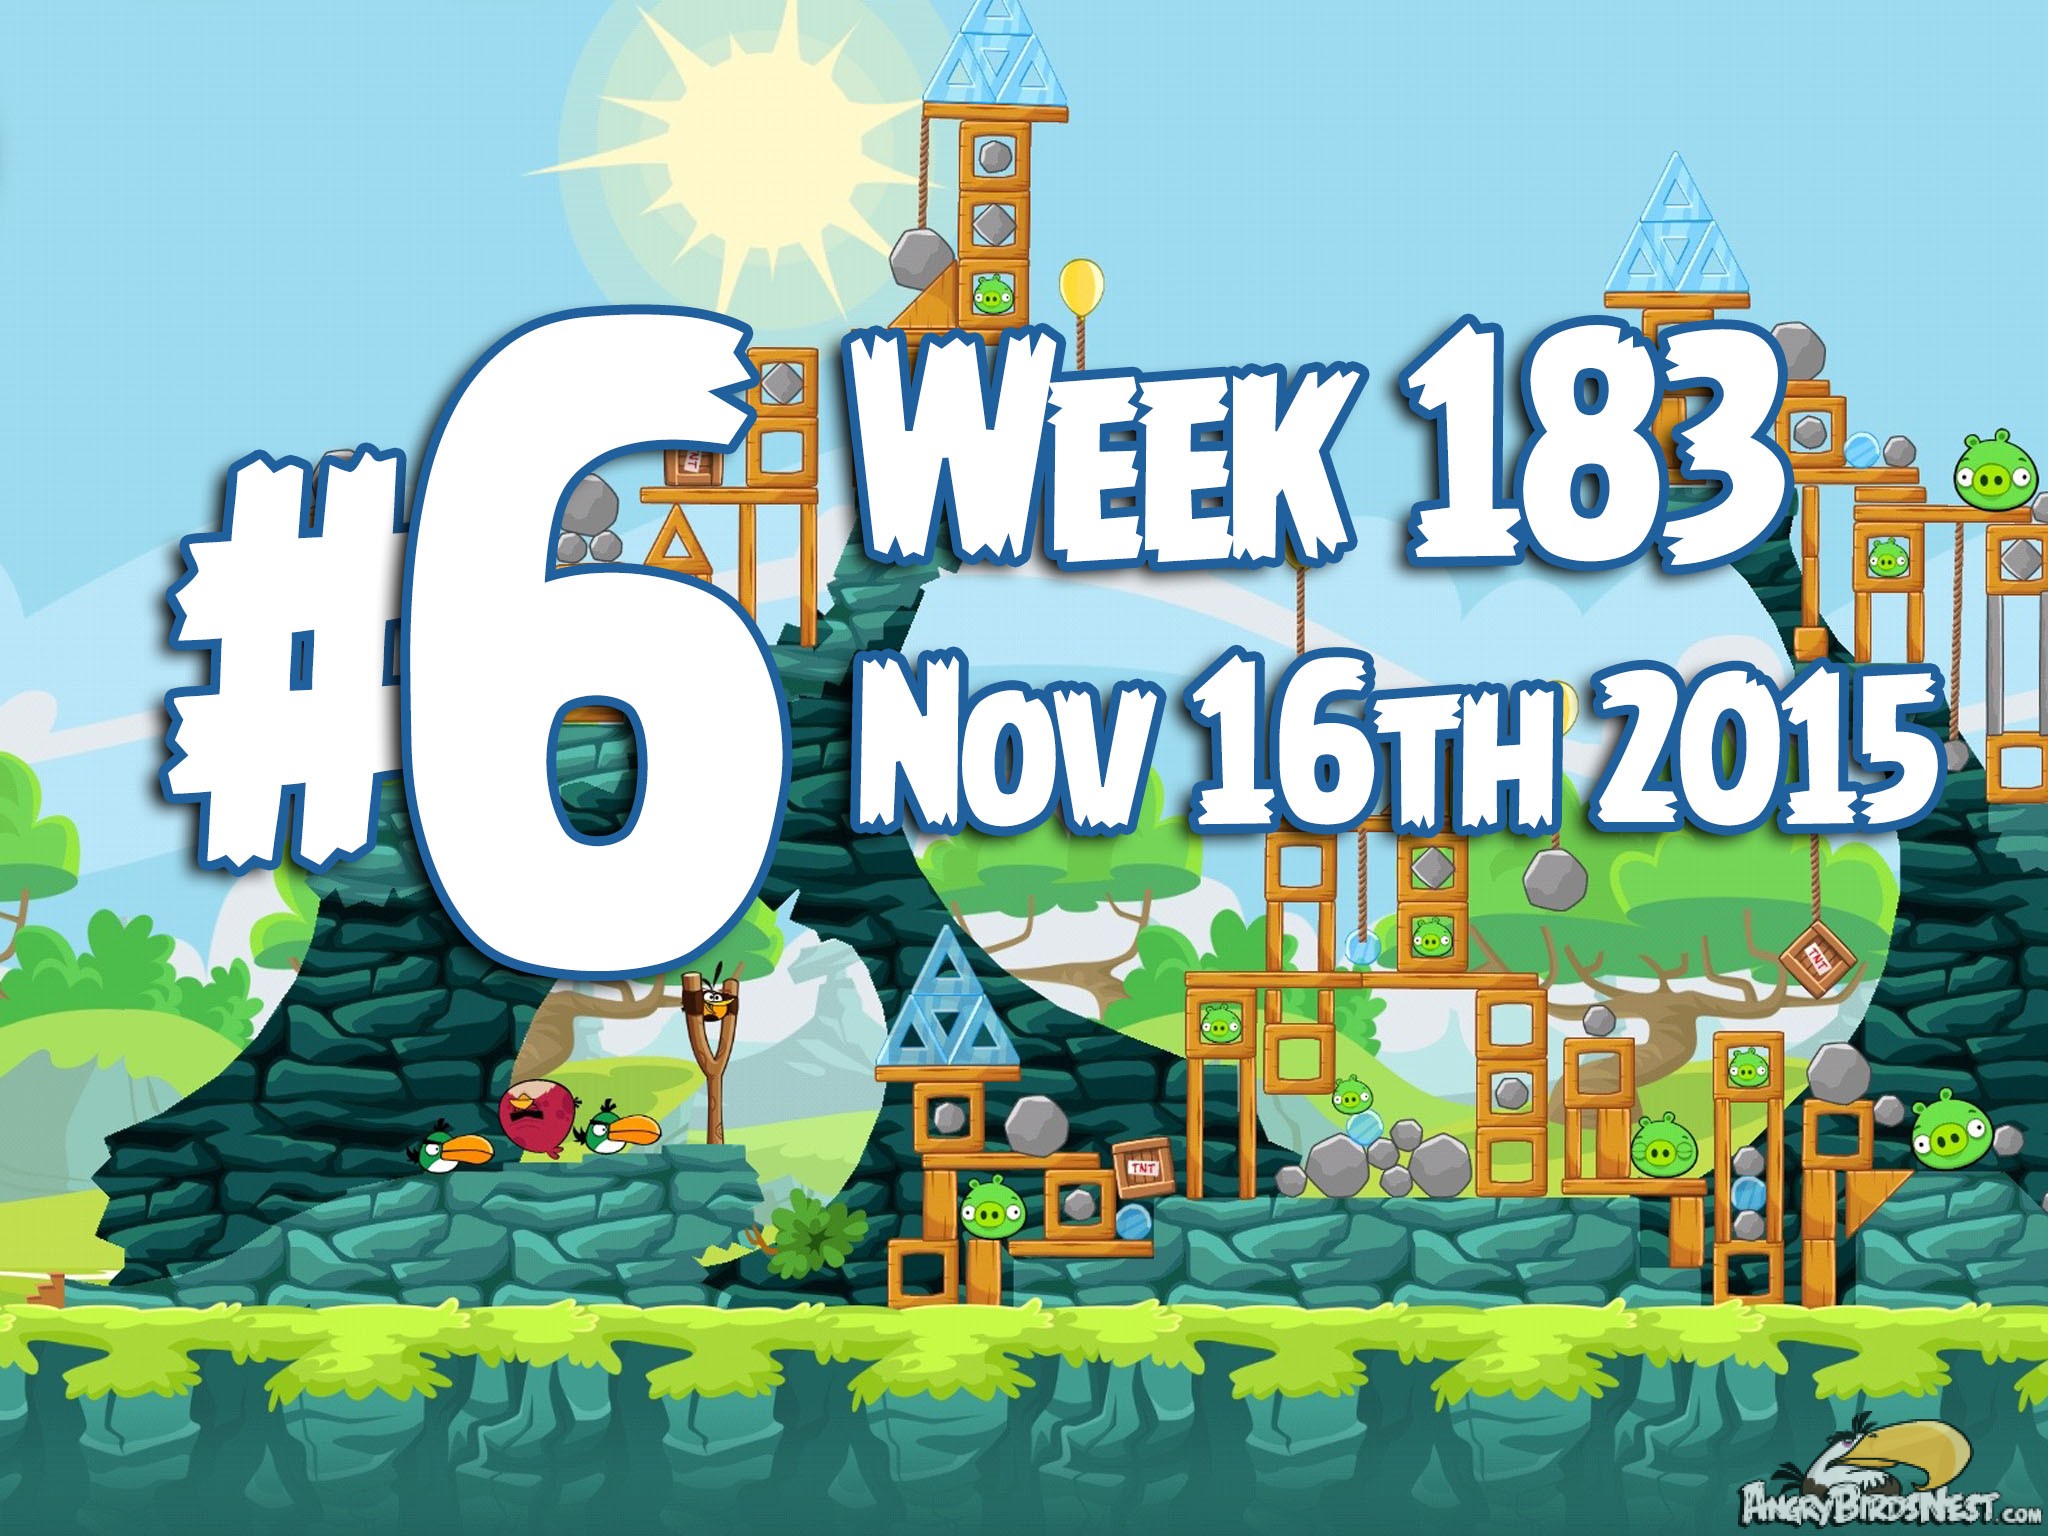 Angry Birds Friends Tournament Week 183 Level 6